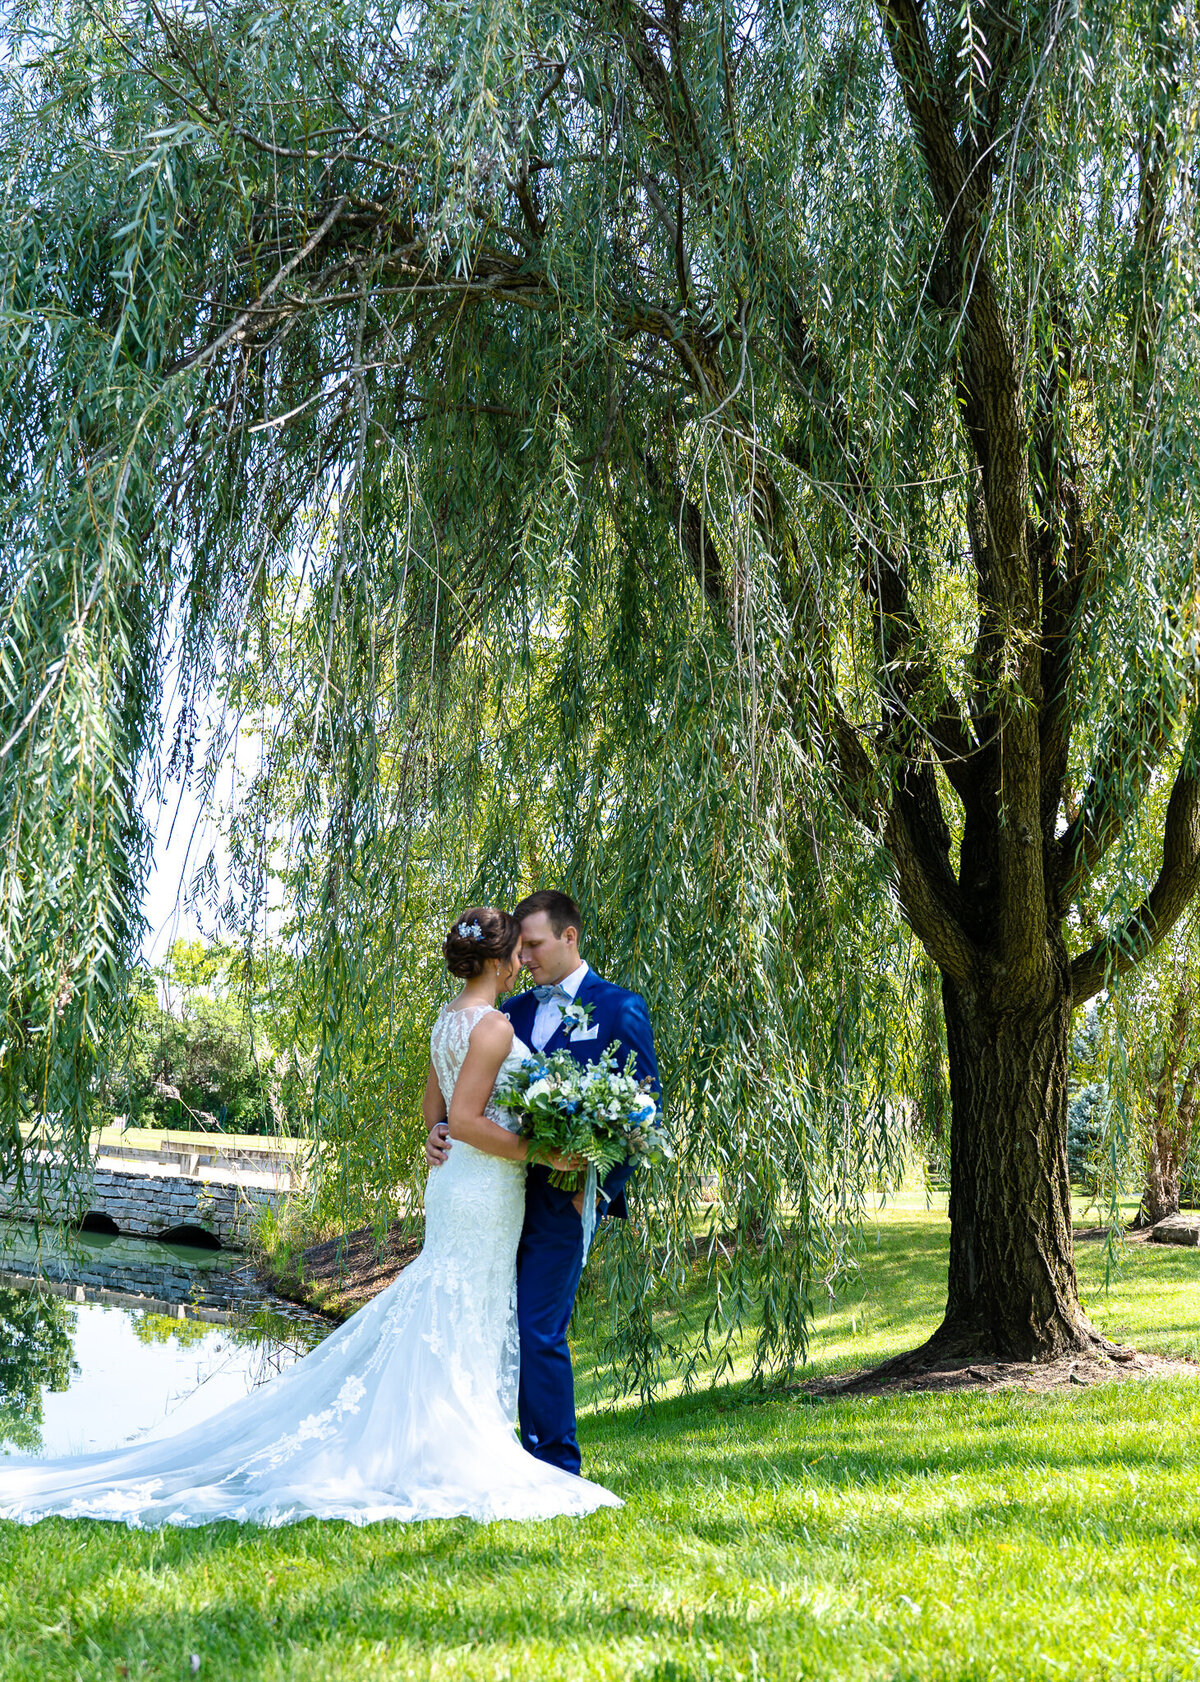 Bride and groom, Michaela and Bryan, touch foreheads under a beautiful weeping willow tree at Everal Barn & Homestead as they wait for their ceremony at Saint Paul Catholic Church and reception at The Estate at New Albany to begin.